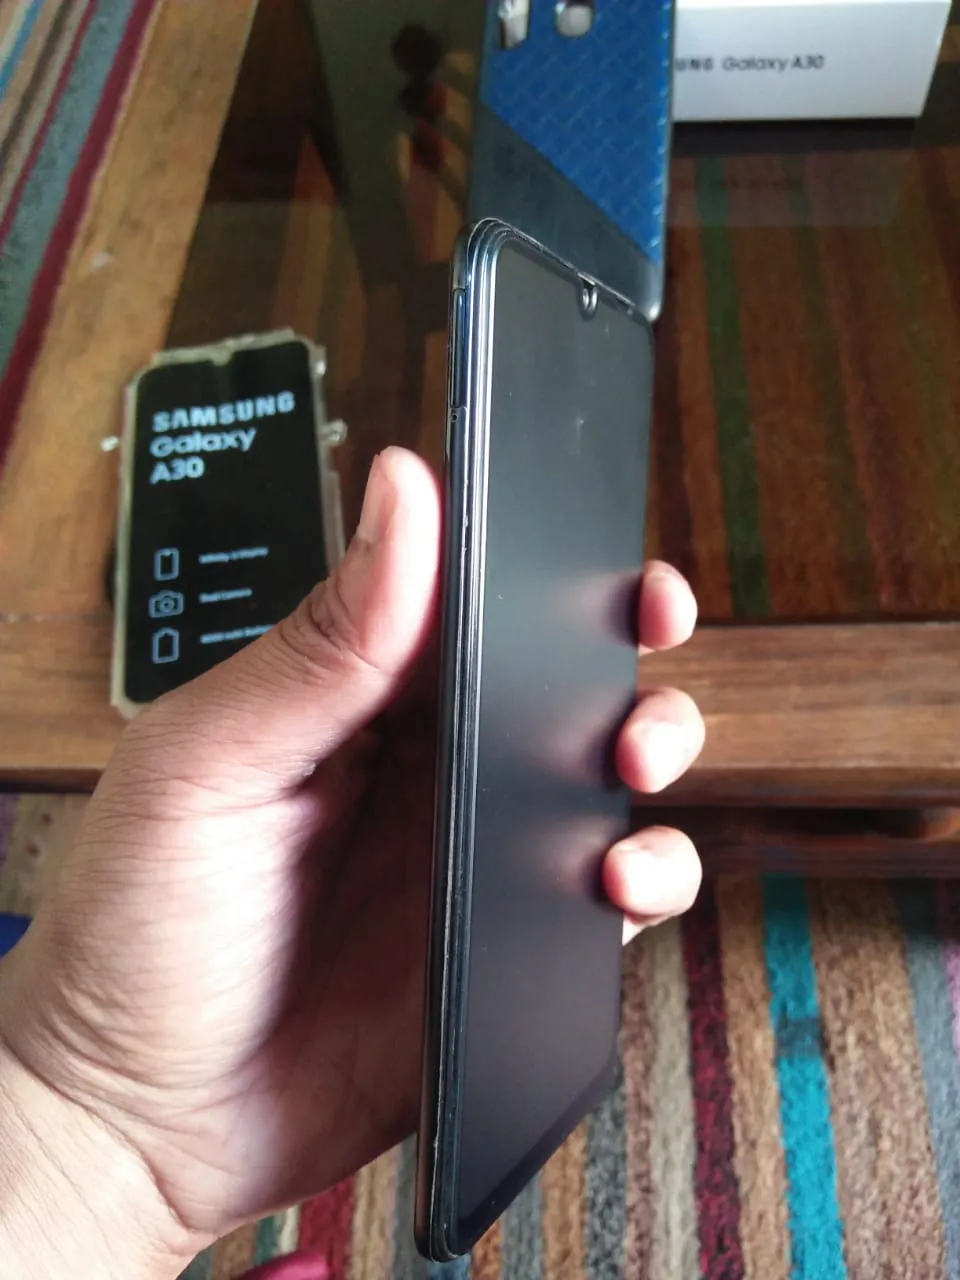 Samsung Galaxy A30 In Lush and just like new Condition - photo 1